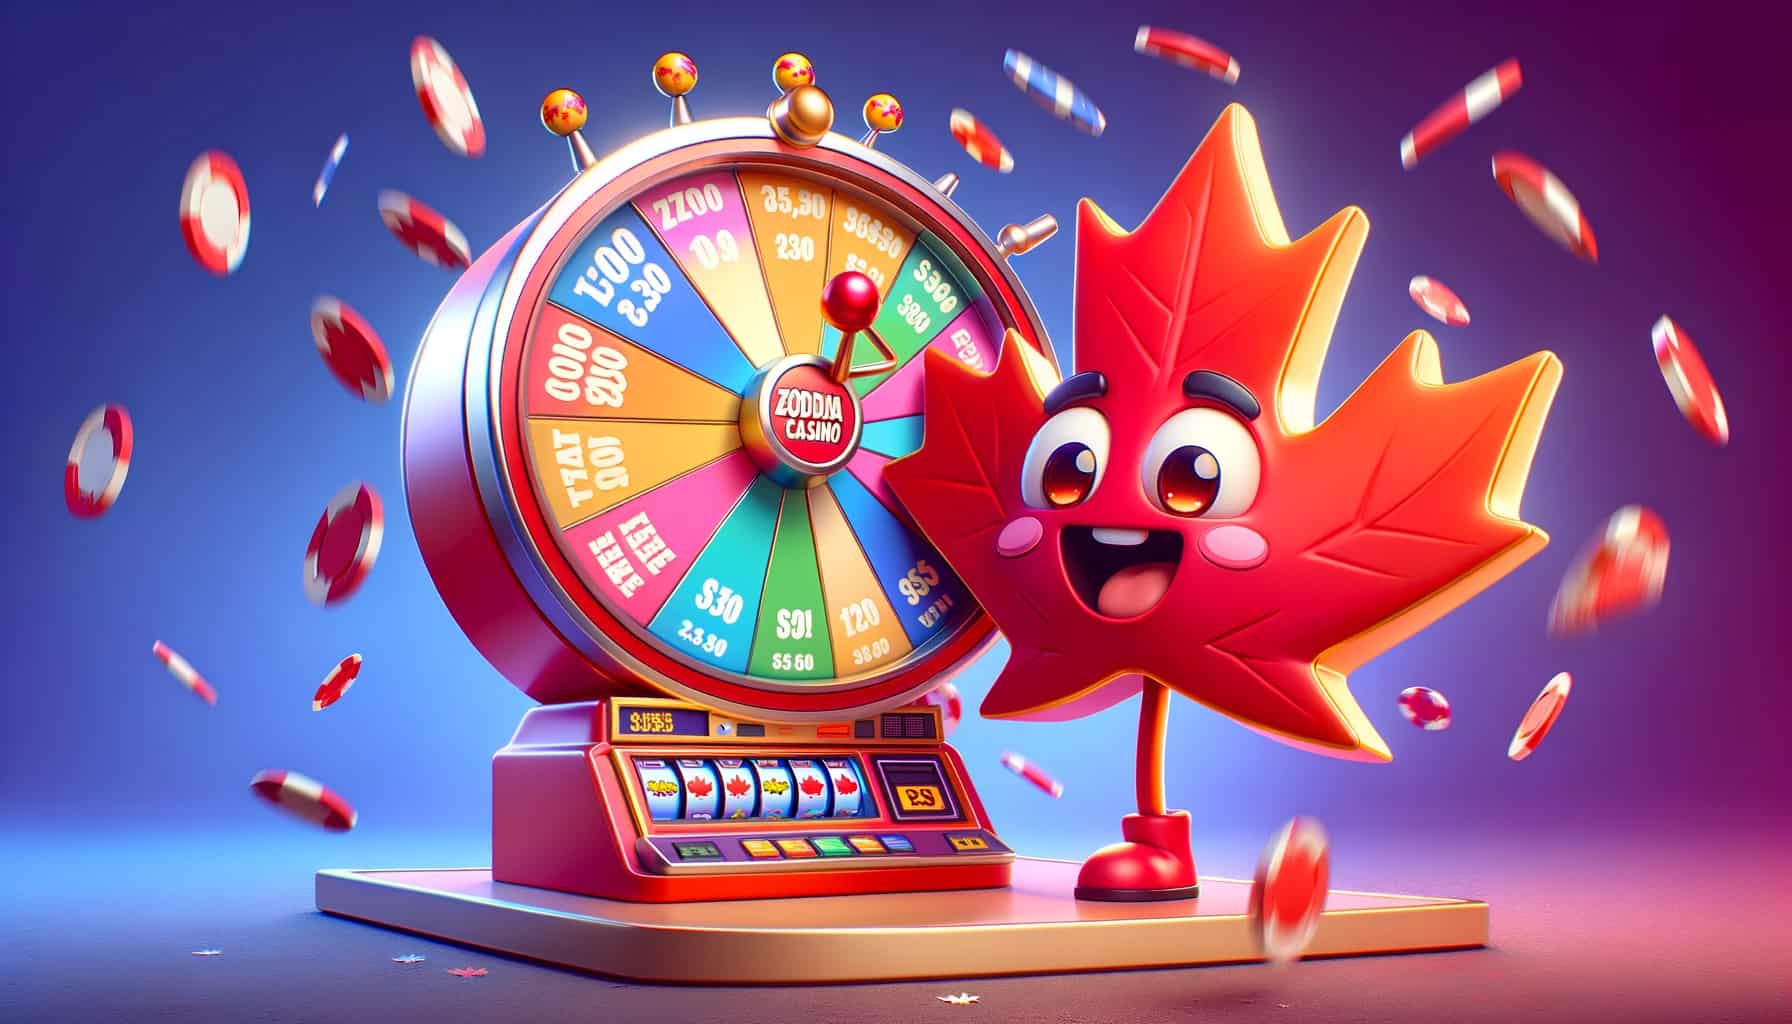 A cartoon character holding a slot machine adorned with a maple leaf